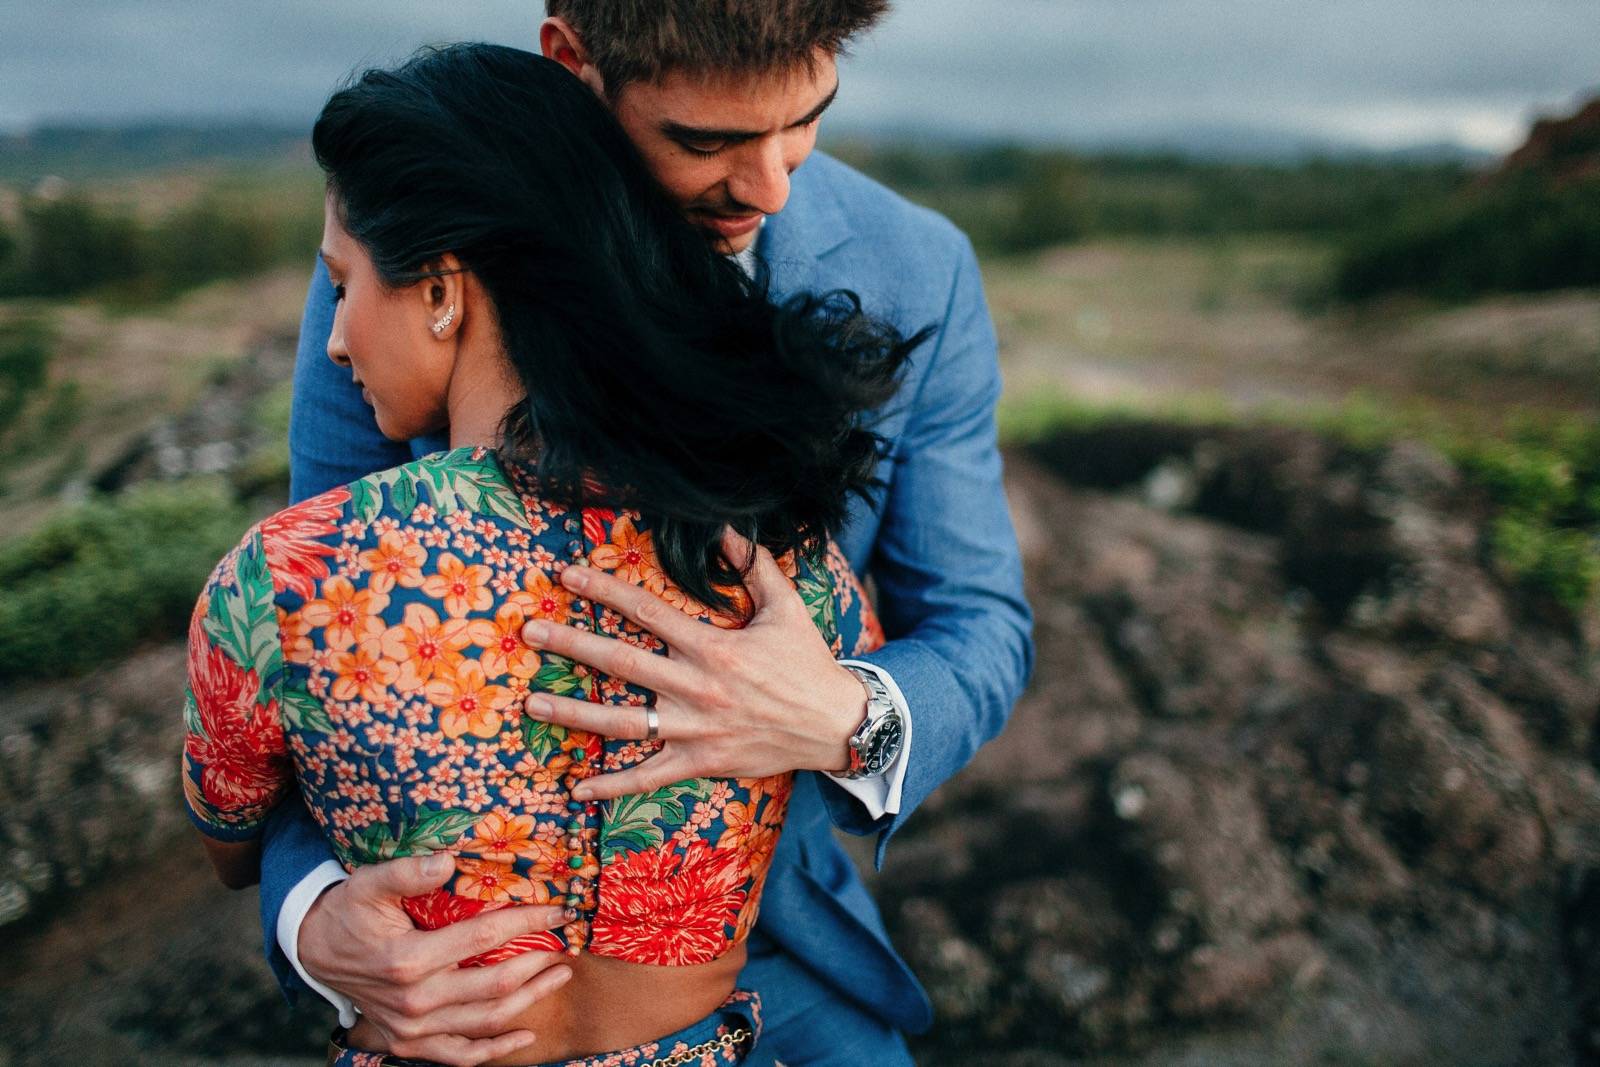 Colorful Indian Wedding on Maui's South Shore